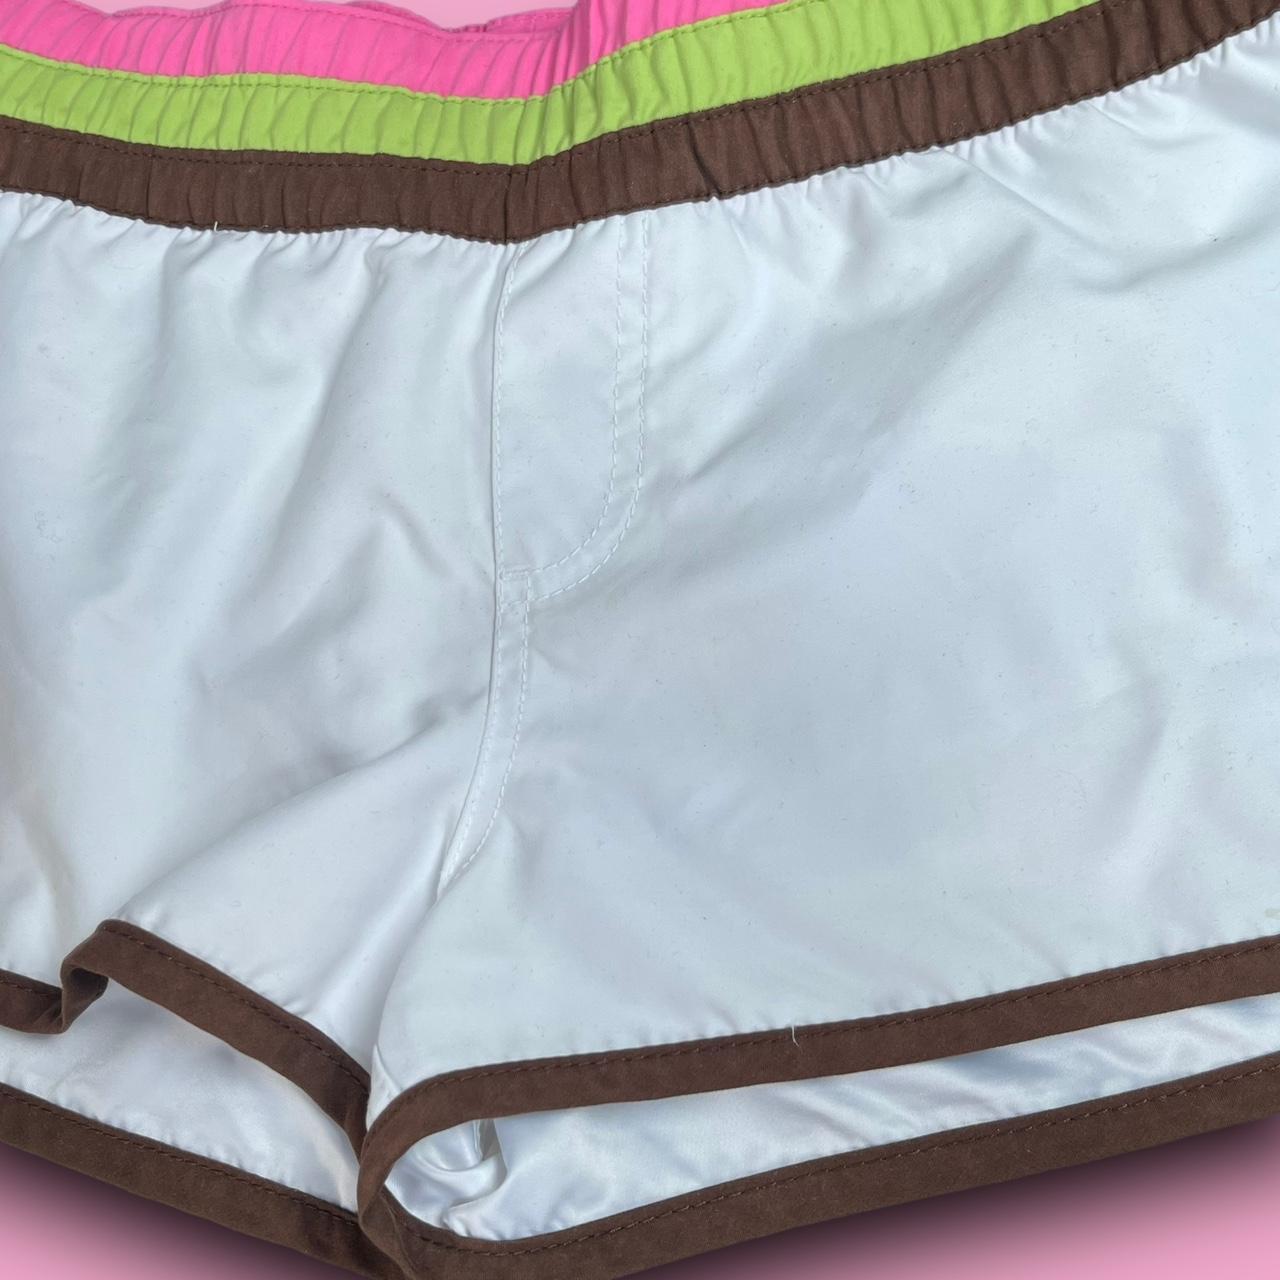 Roxy Women's White and Pink Shorts (4)